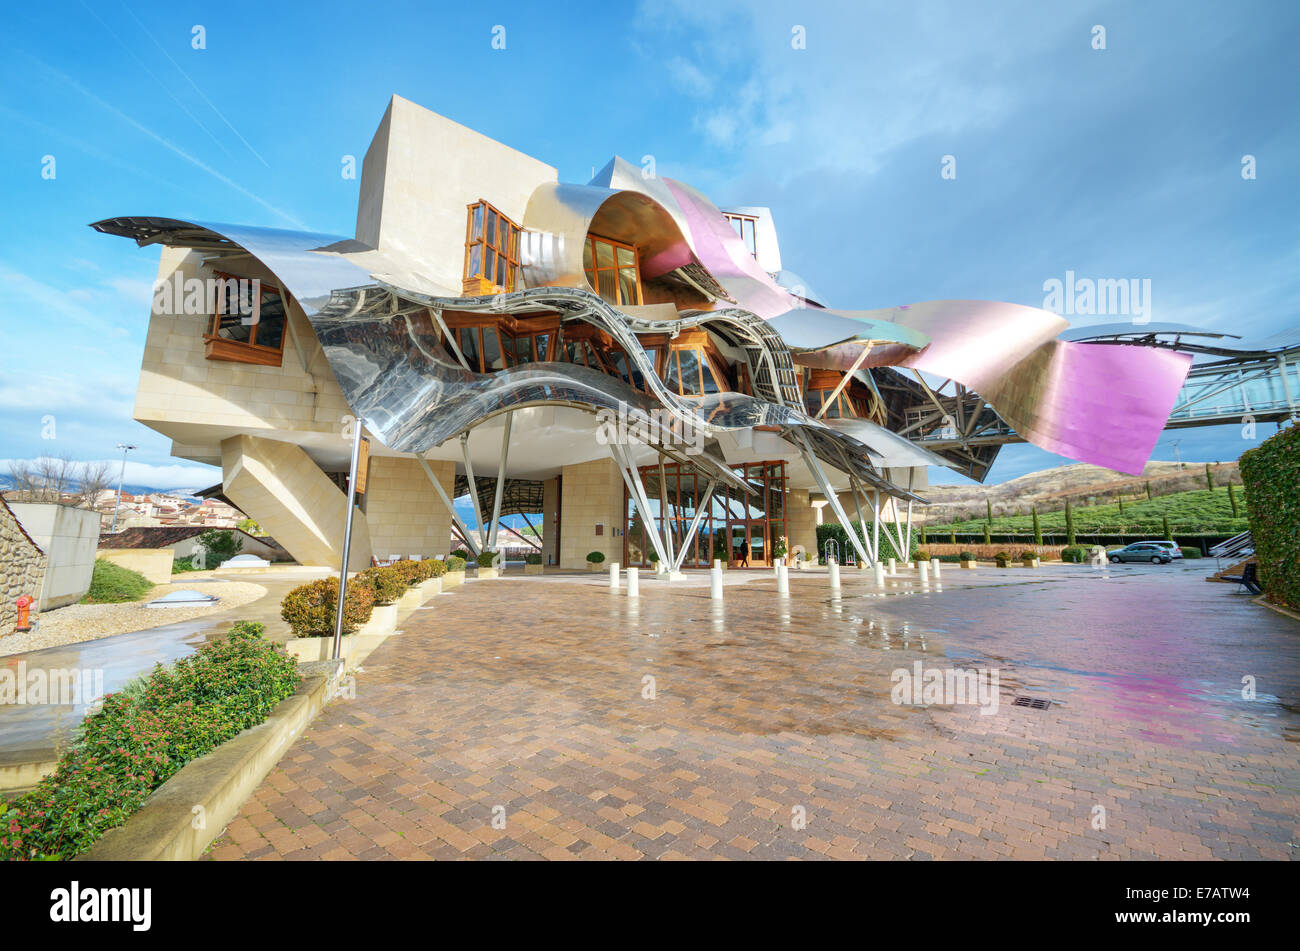 El ciego, Spain- January 10, 2014: Winery of Marques de Riscal on January 10, 2014 in Elciego, Basque Country, Spain. This moder Stock Photo